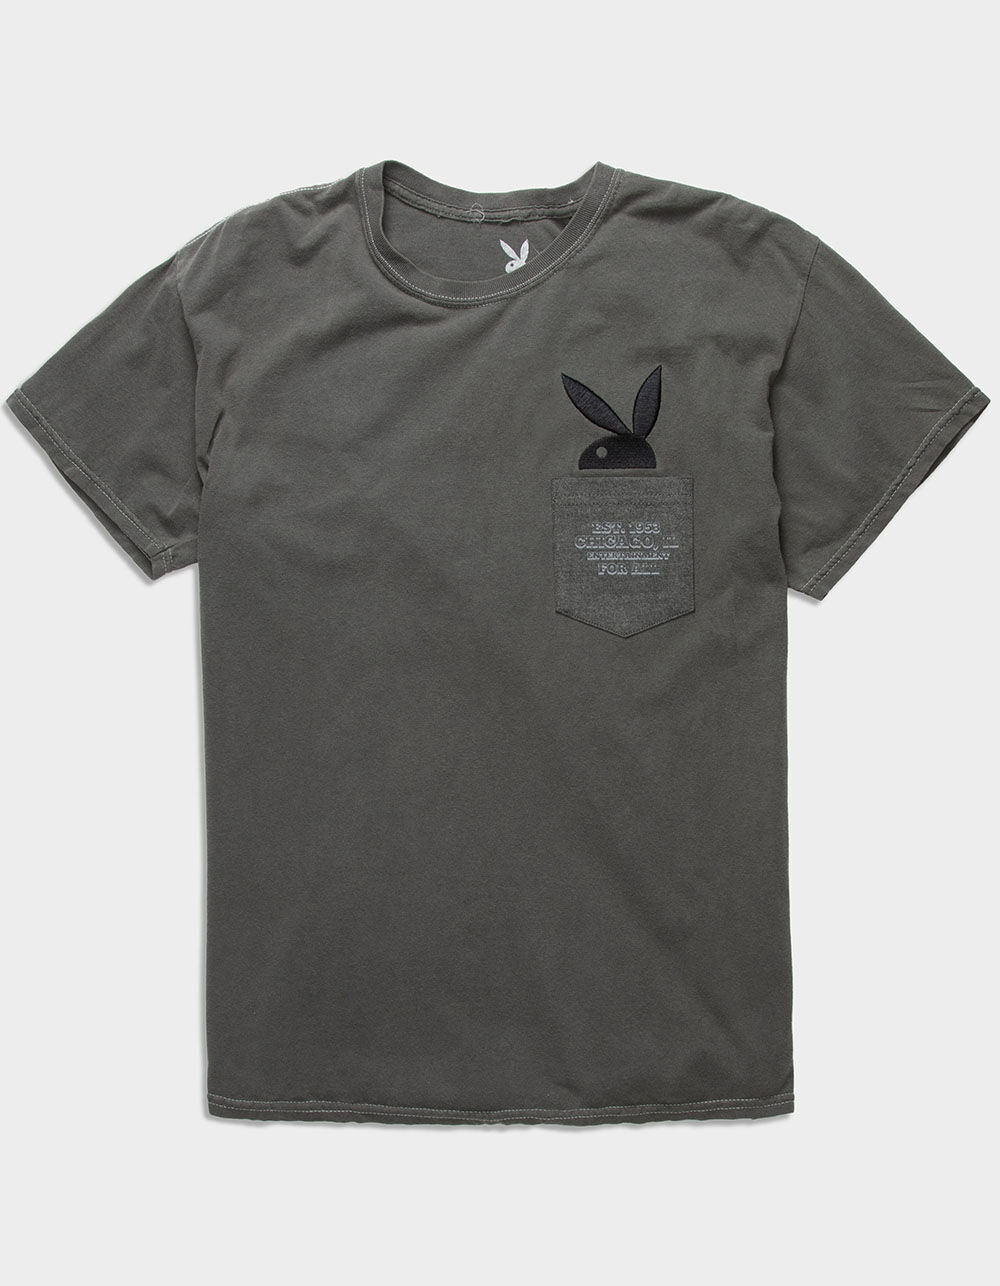 Playboy Pocket Tee Online | www.southernandwessexbcc.co.uk